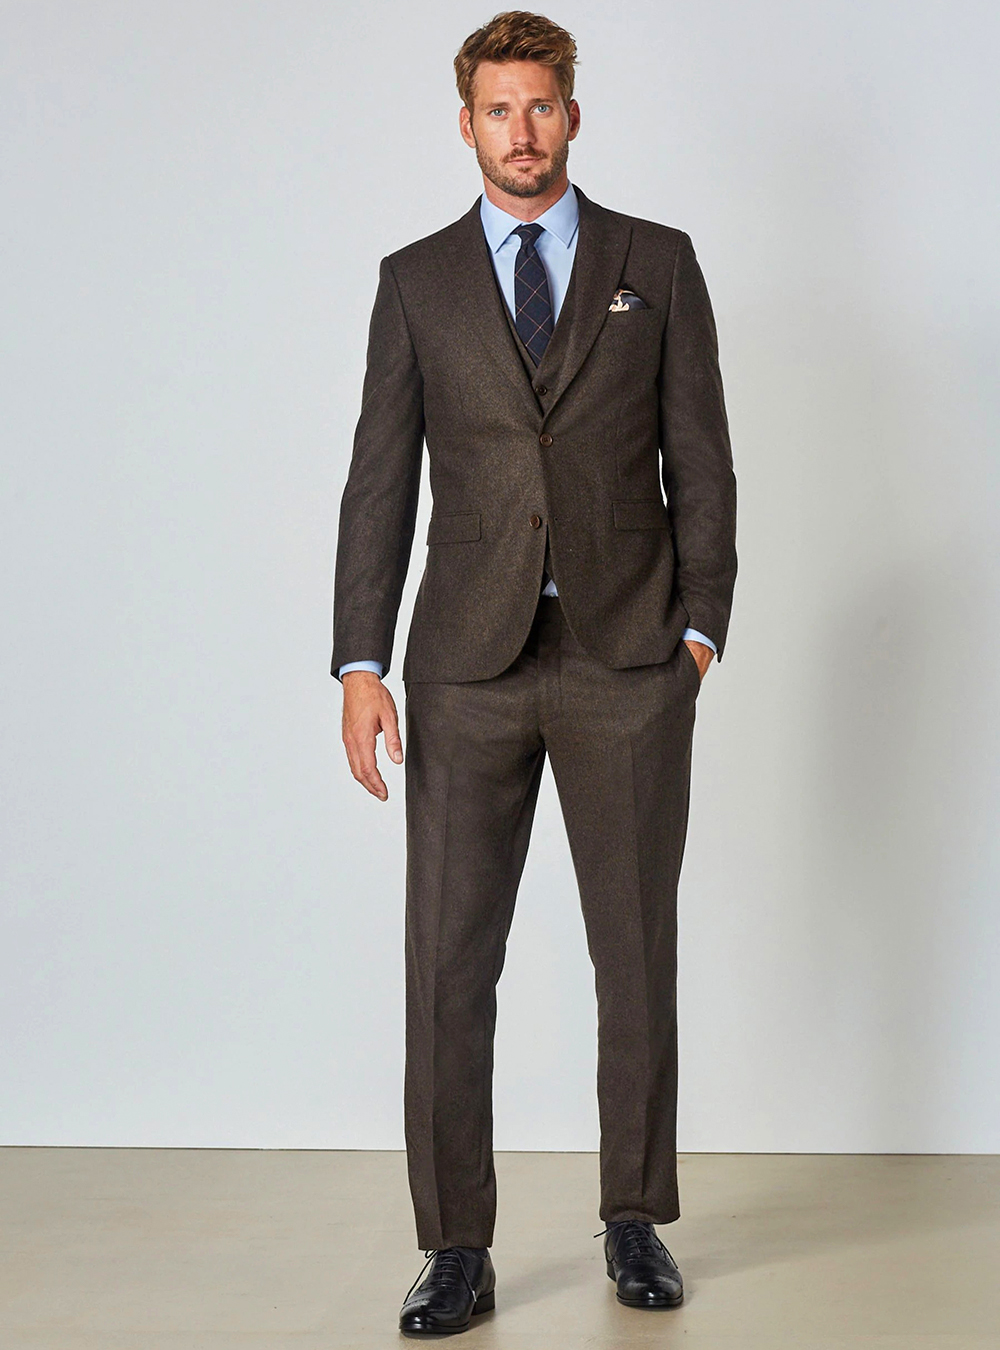 Brown three-piece suit, blue dress shirt, navy tie and black brogues